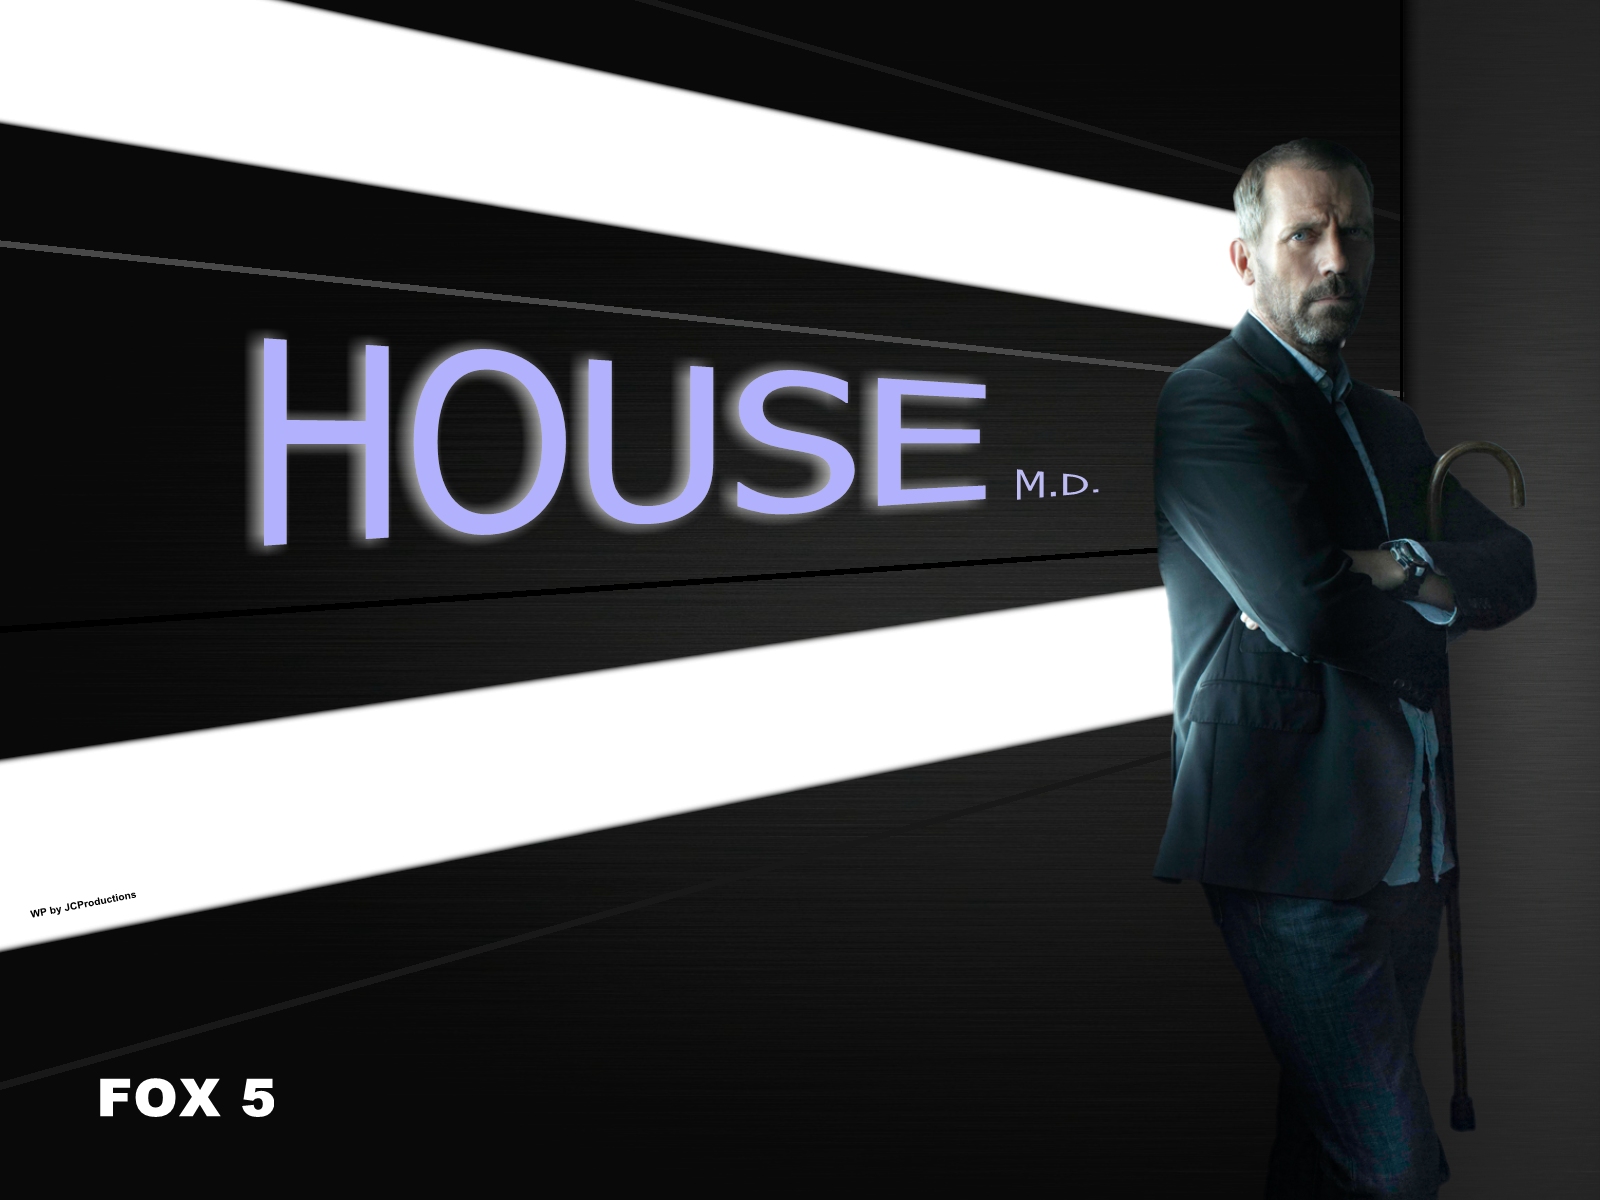 Download full size hugh laurie, hugh, laurie, house md, doctors, medicine, cuddy, olivia wilde, fox, house House M.D. wallpaper / 1600x1200